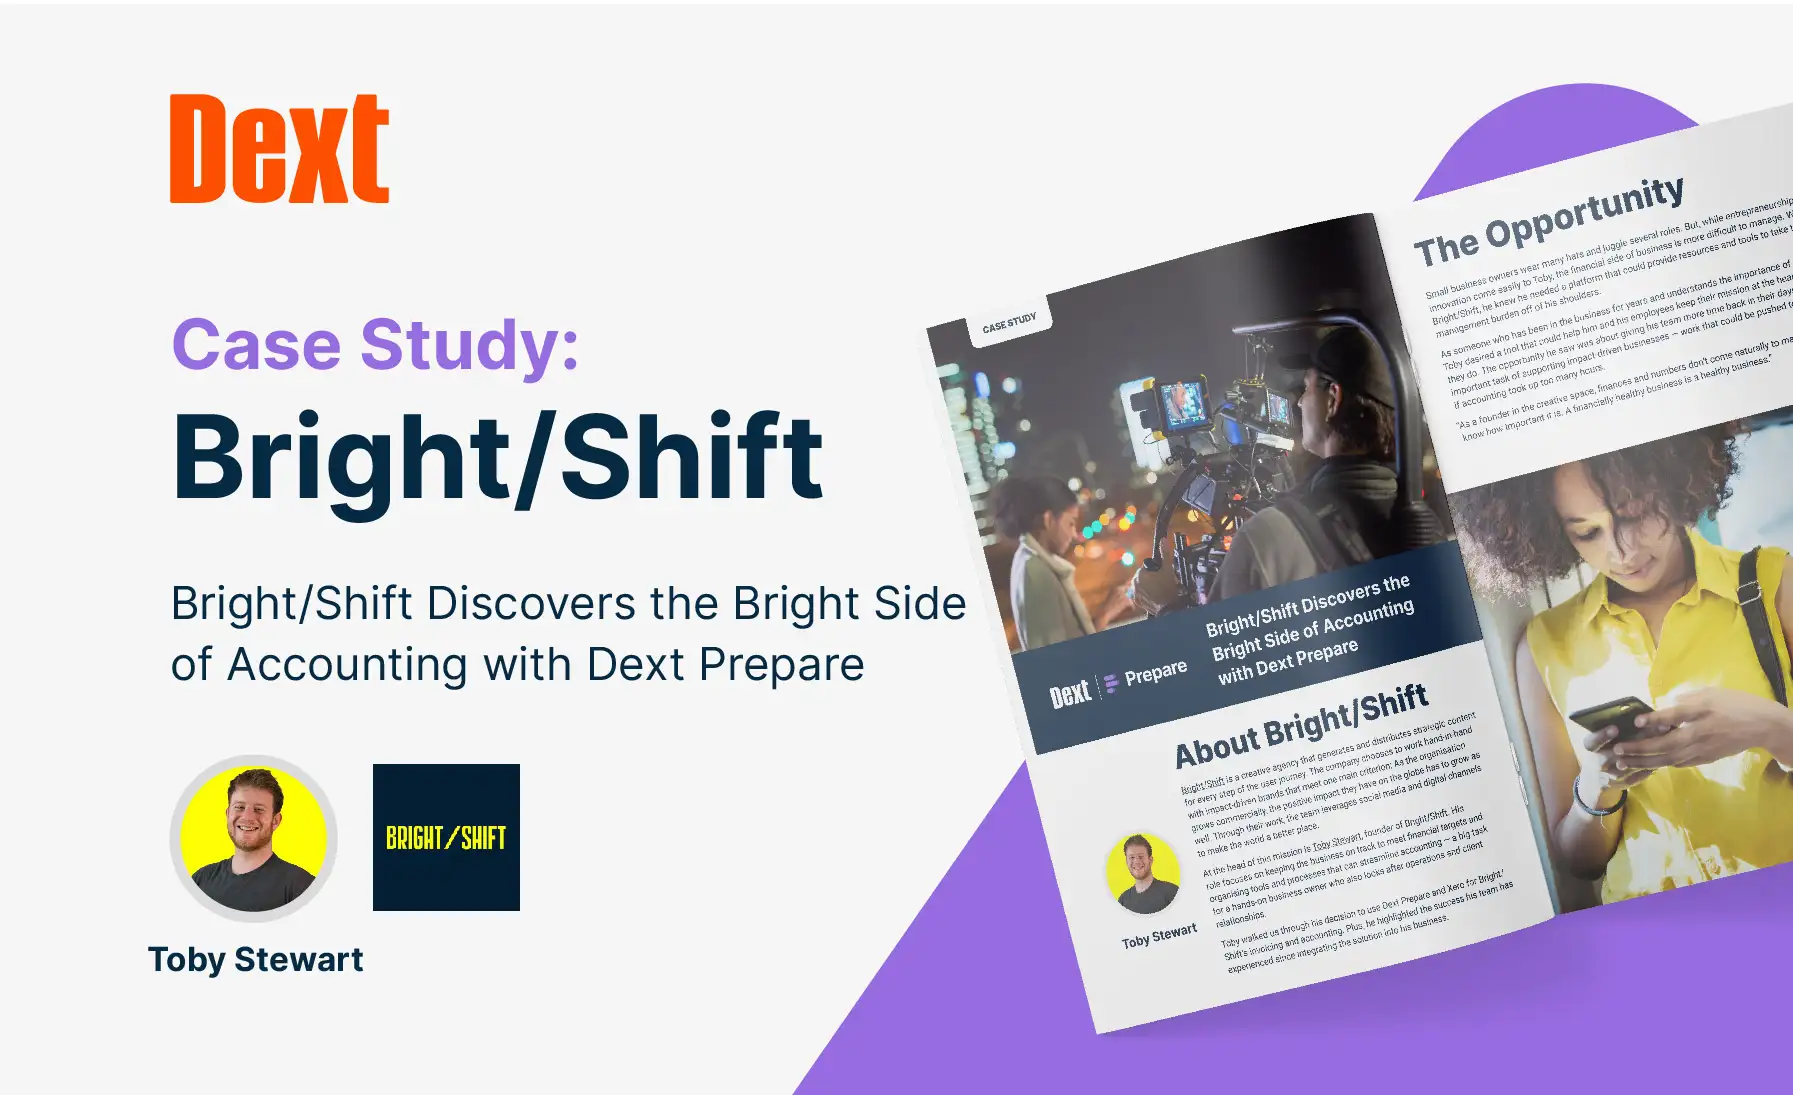 Bright/Shift Discovers the Bright Side of Accounting with Dext Prepare image